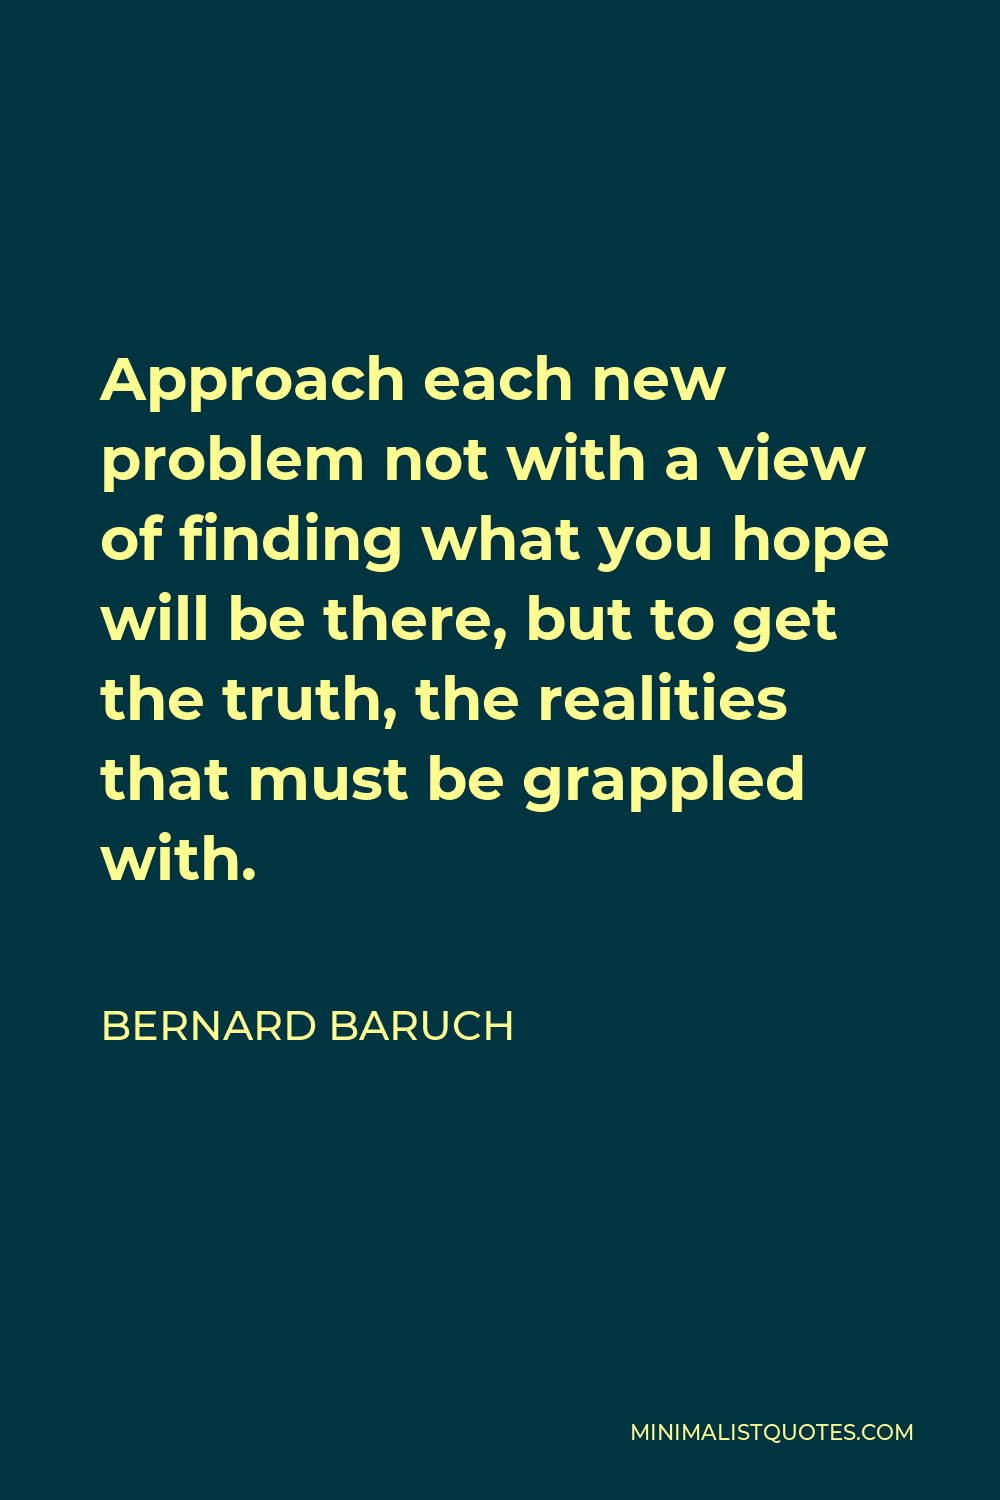 Bernard Baruch Quote - Approach each new problem not with a view of finding what you hope will be there, but to get the truth, the realities that must be grappled with.